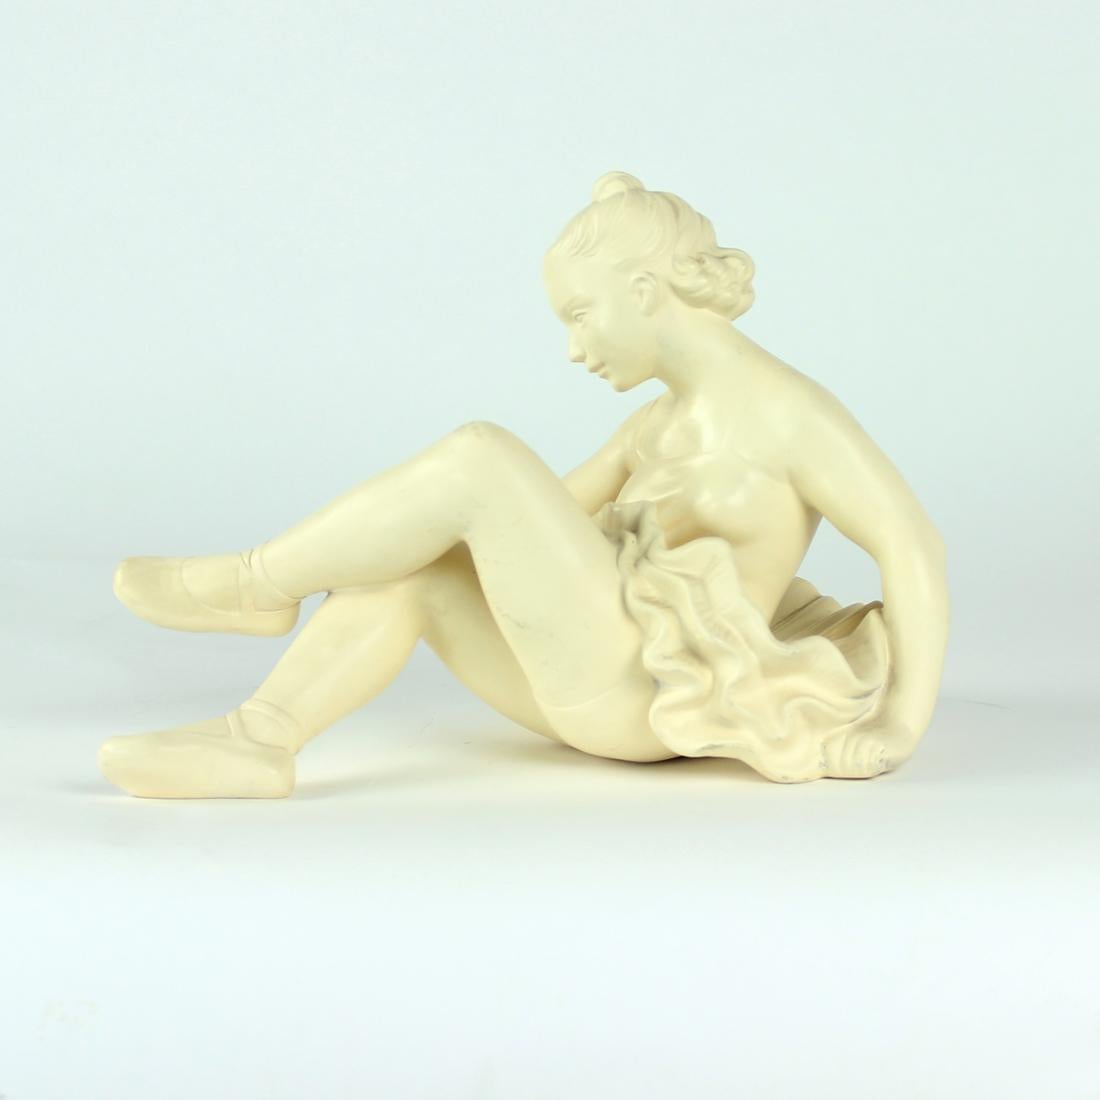 Beautiful vintage statue of a sitting ballet dancer. Produced by Jihokera in Czechoslovakia in the 1960s. The sculpture is in an excellent condition. There are no damages. Minor age wear visible on the finish, which in our opinion only adds to the